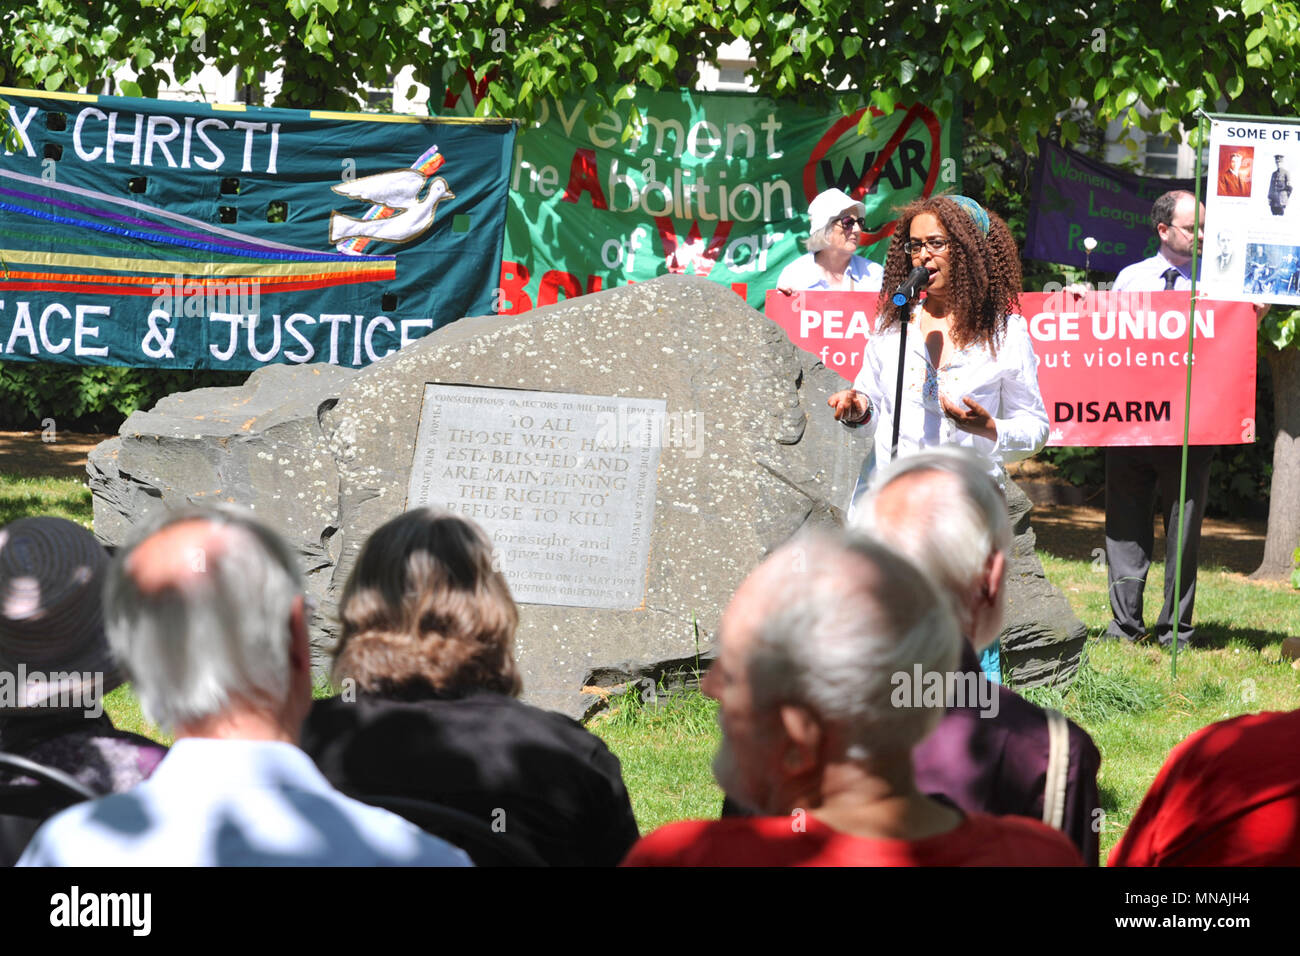 London, UK. 15th May 2018. Selam Kidane (Eritrean human rights activist) speaking at the Conscientious Objectors Commemorative Stone, during a ceremony of remembrance held in Tavistock Square, London, UK to mark Conscientious Objectors Day.  79 white carnations were laid at the stone to commemorate various people who have historically refused to kill. Credit: Michael Preston/Alamy Live News Stock Photo